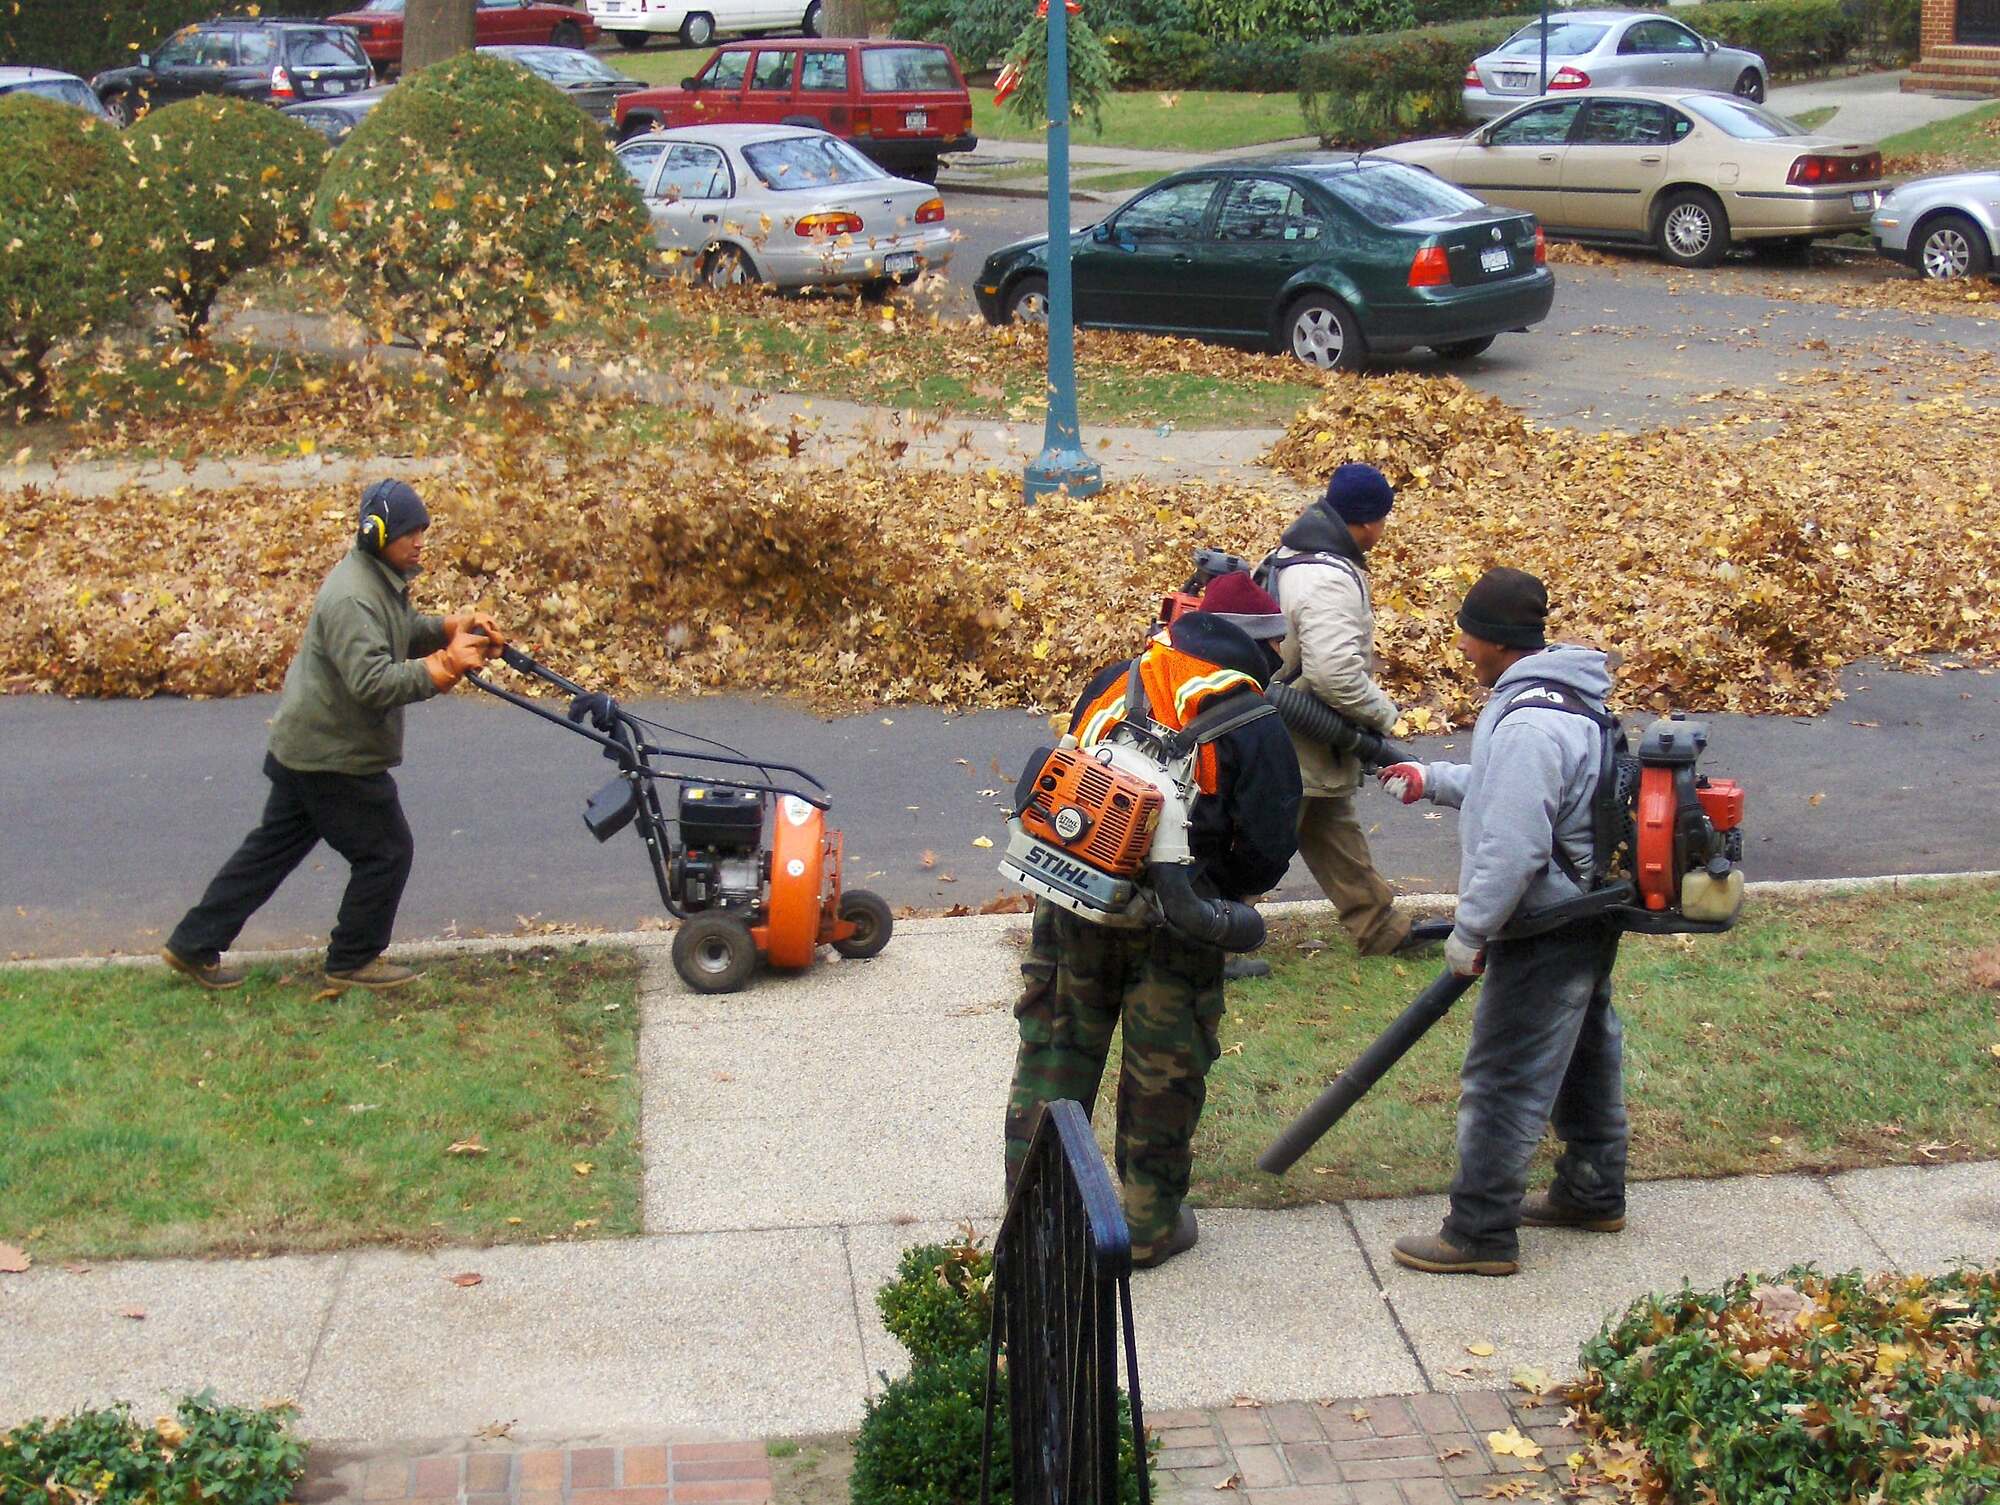 Photograph of four men doing yard maintenance. Three of the men are carrying leaf blowers, and one appears to be talking to another. A fourth man is pushing some other wheeled piece of lawn equipment.